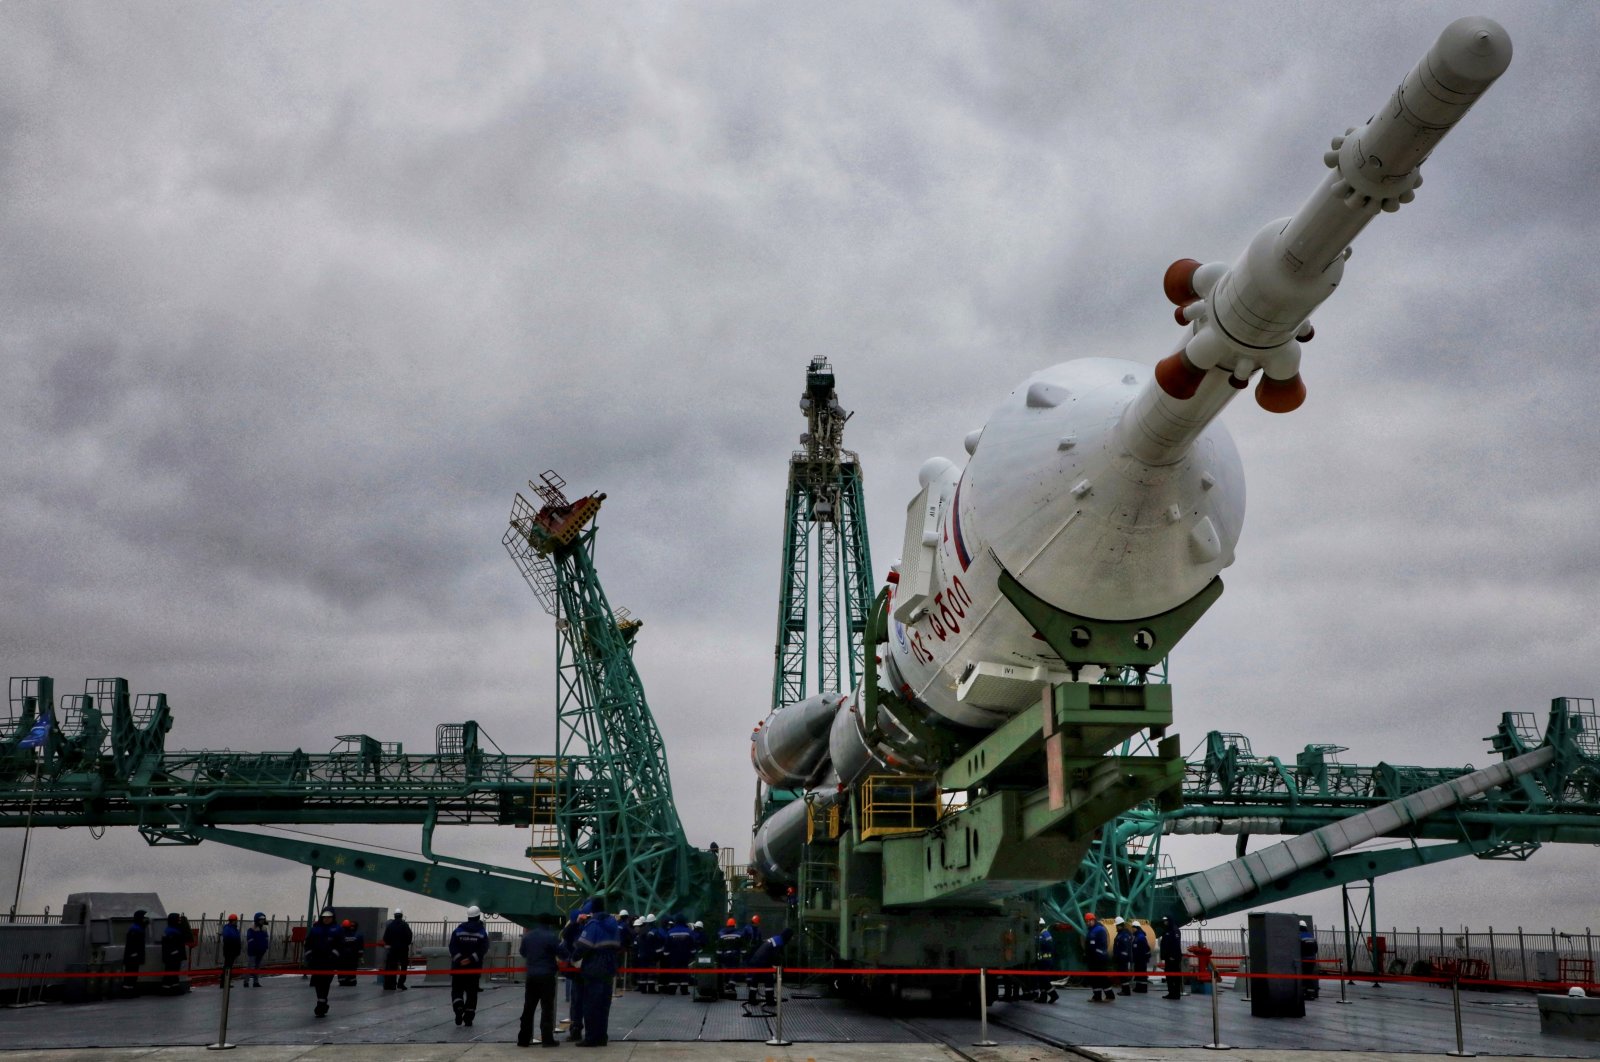 The Soyuz-2.1a rocket booster with the Soyuz MS-21 spacecraft is rolled out onto the launchpad ahead of its upcoming launch to the International Space Station (ISS), at the Baikonur Cosmodrome, Kazakhstan, March 15, 2022. (Roscosmos via Reuters)